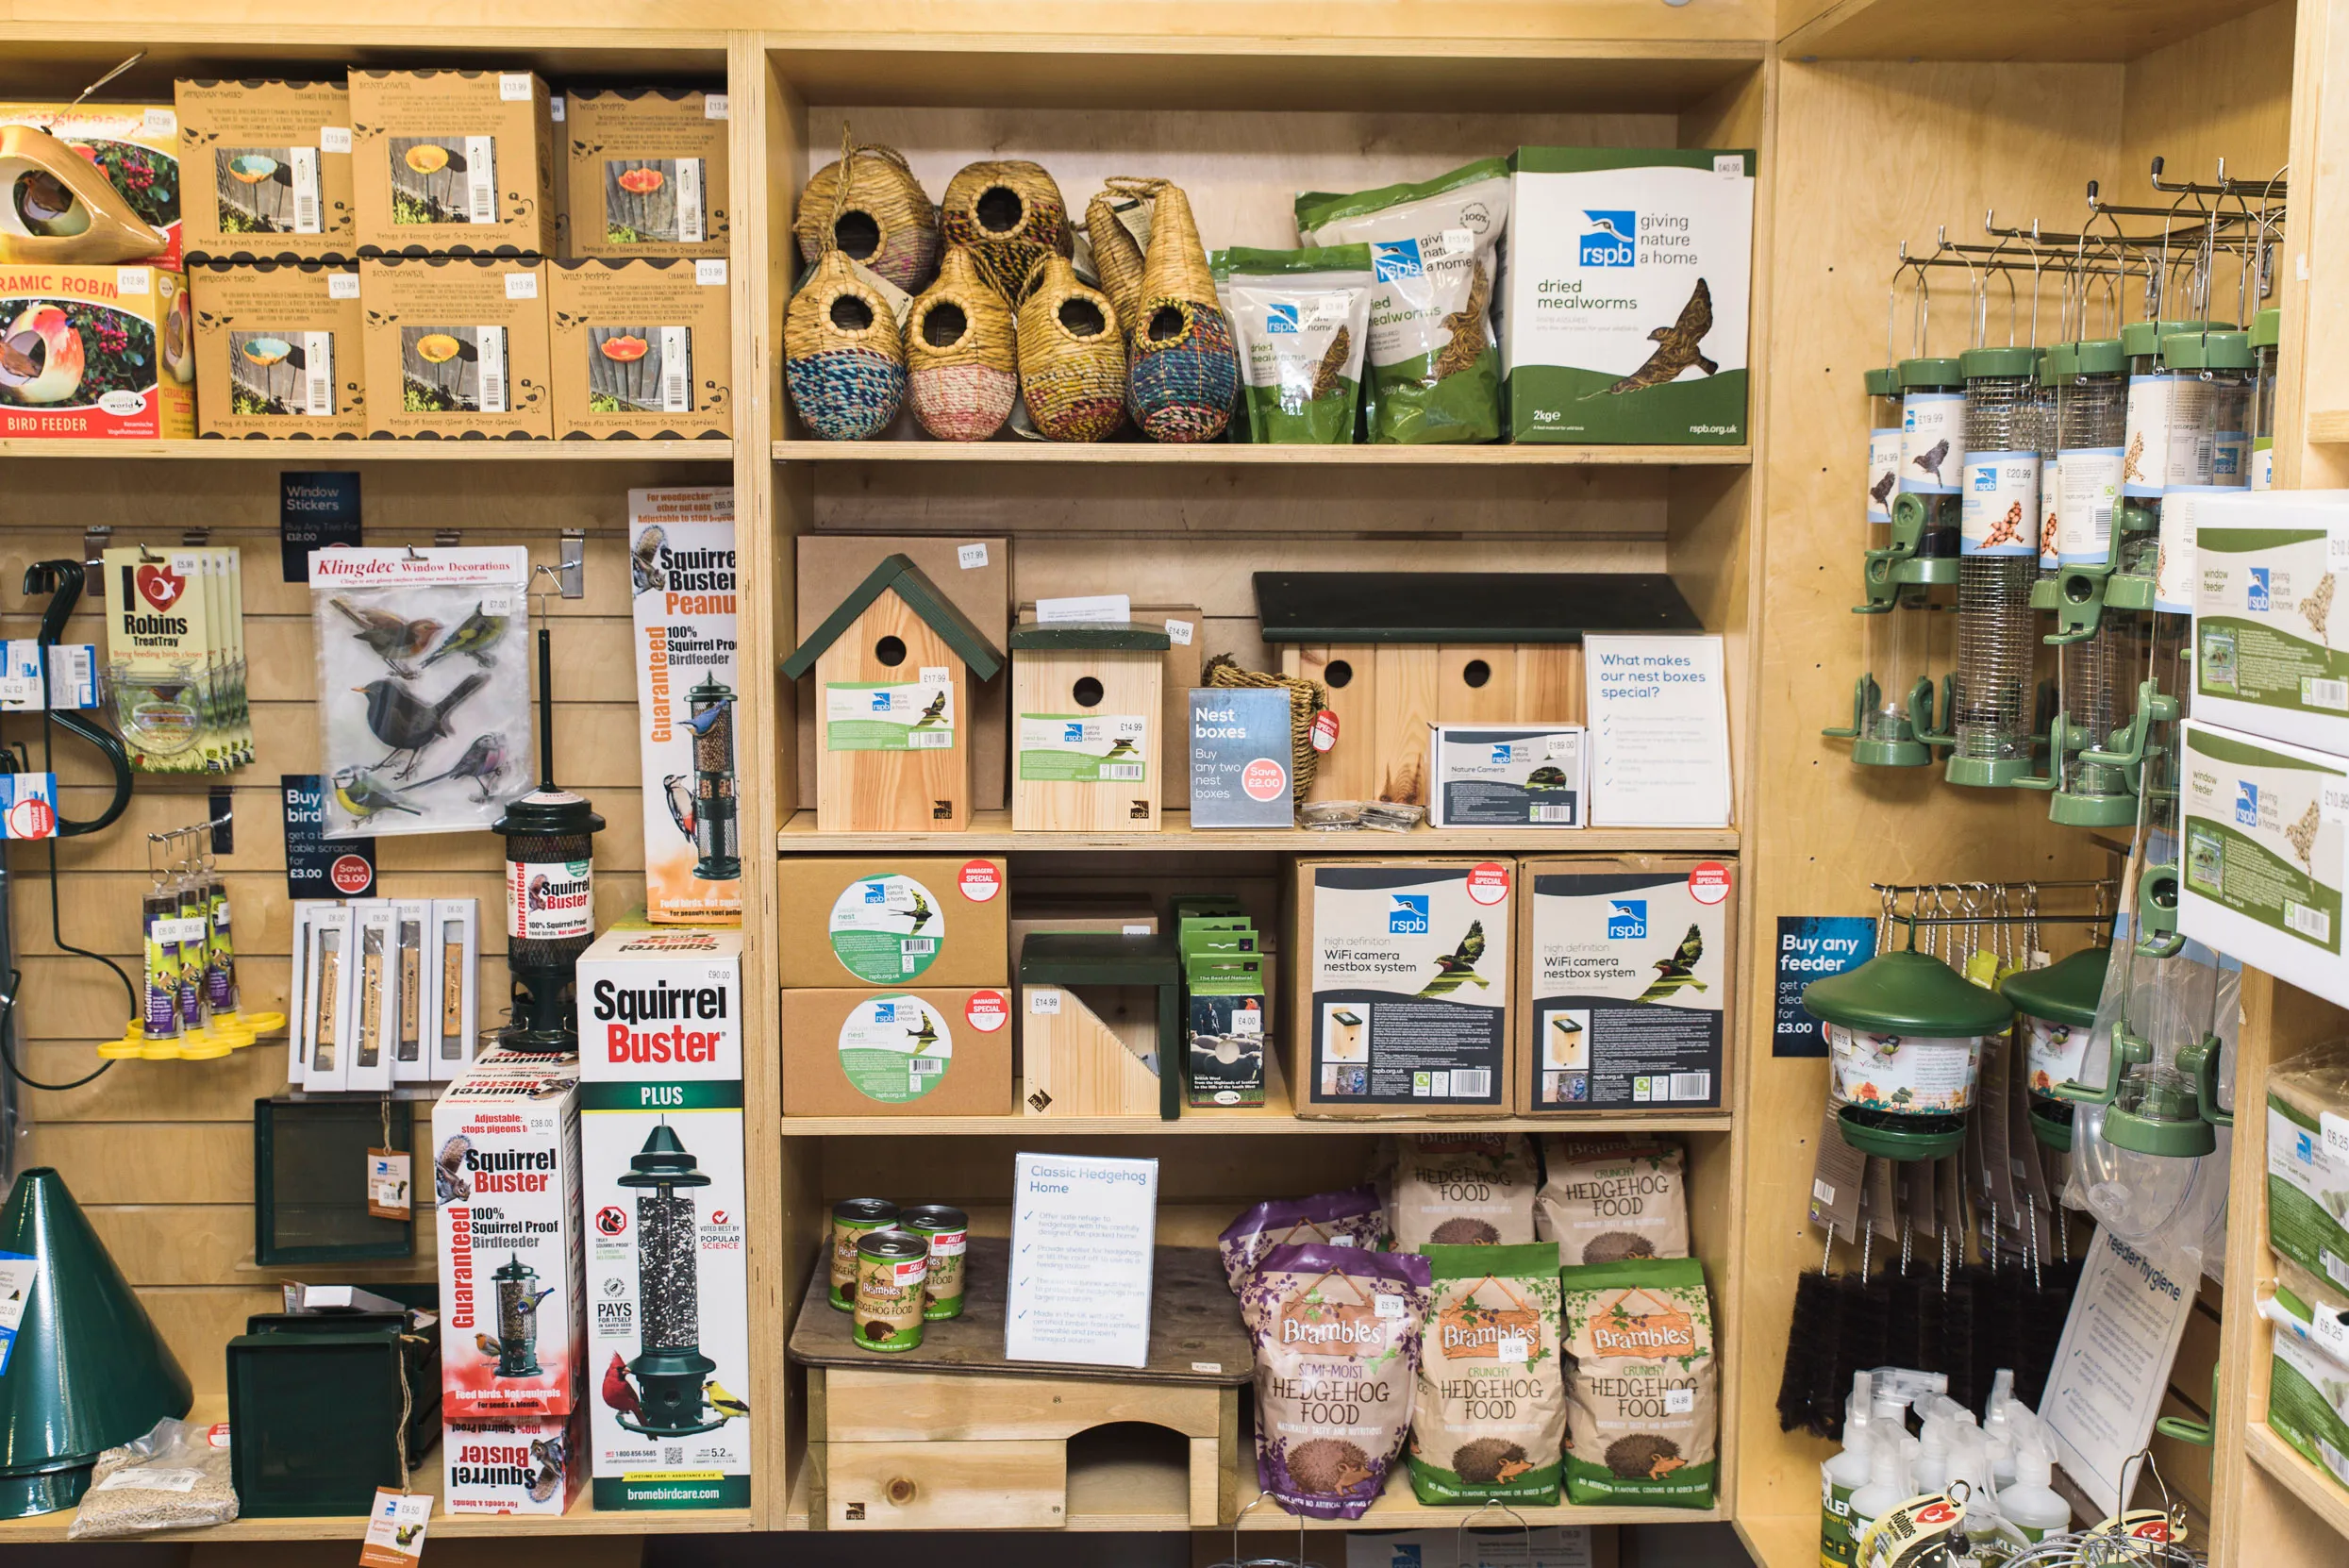 Store shelves consisting of RSPB bird and nest boxes.